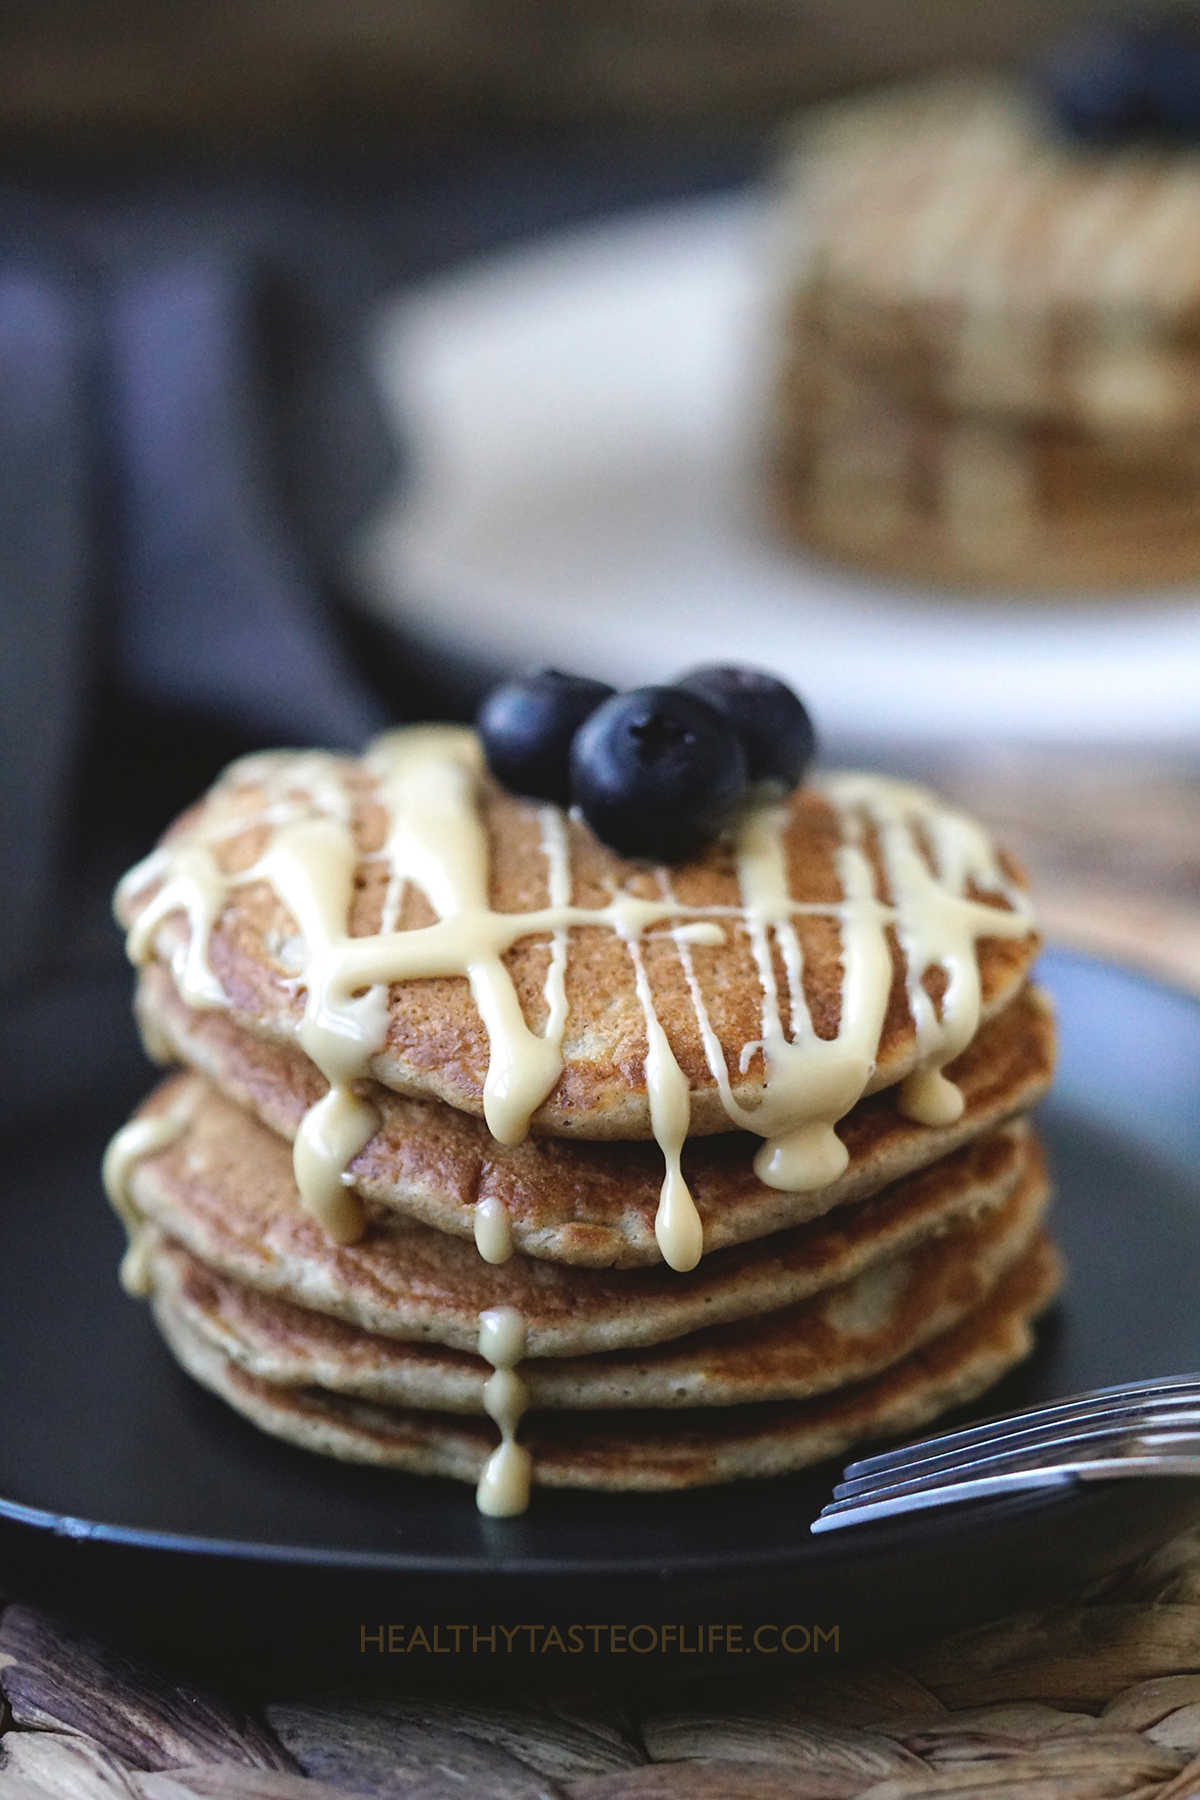 Stack of oat flour pancakes garnished with blueberries and maple cream.